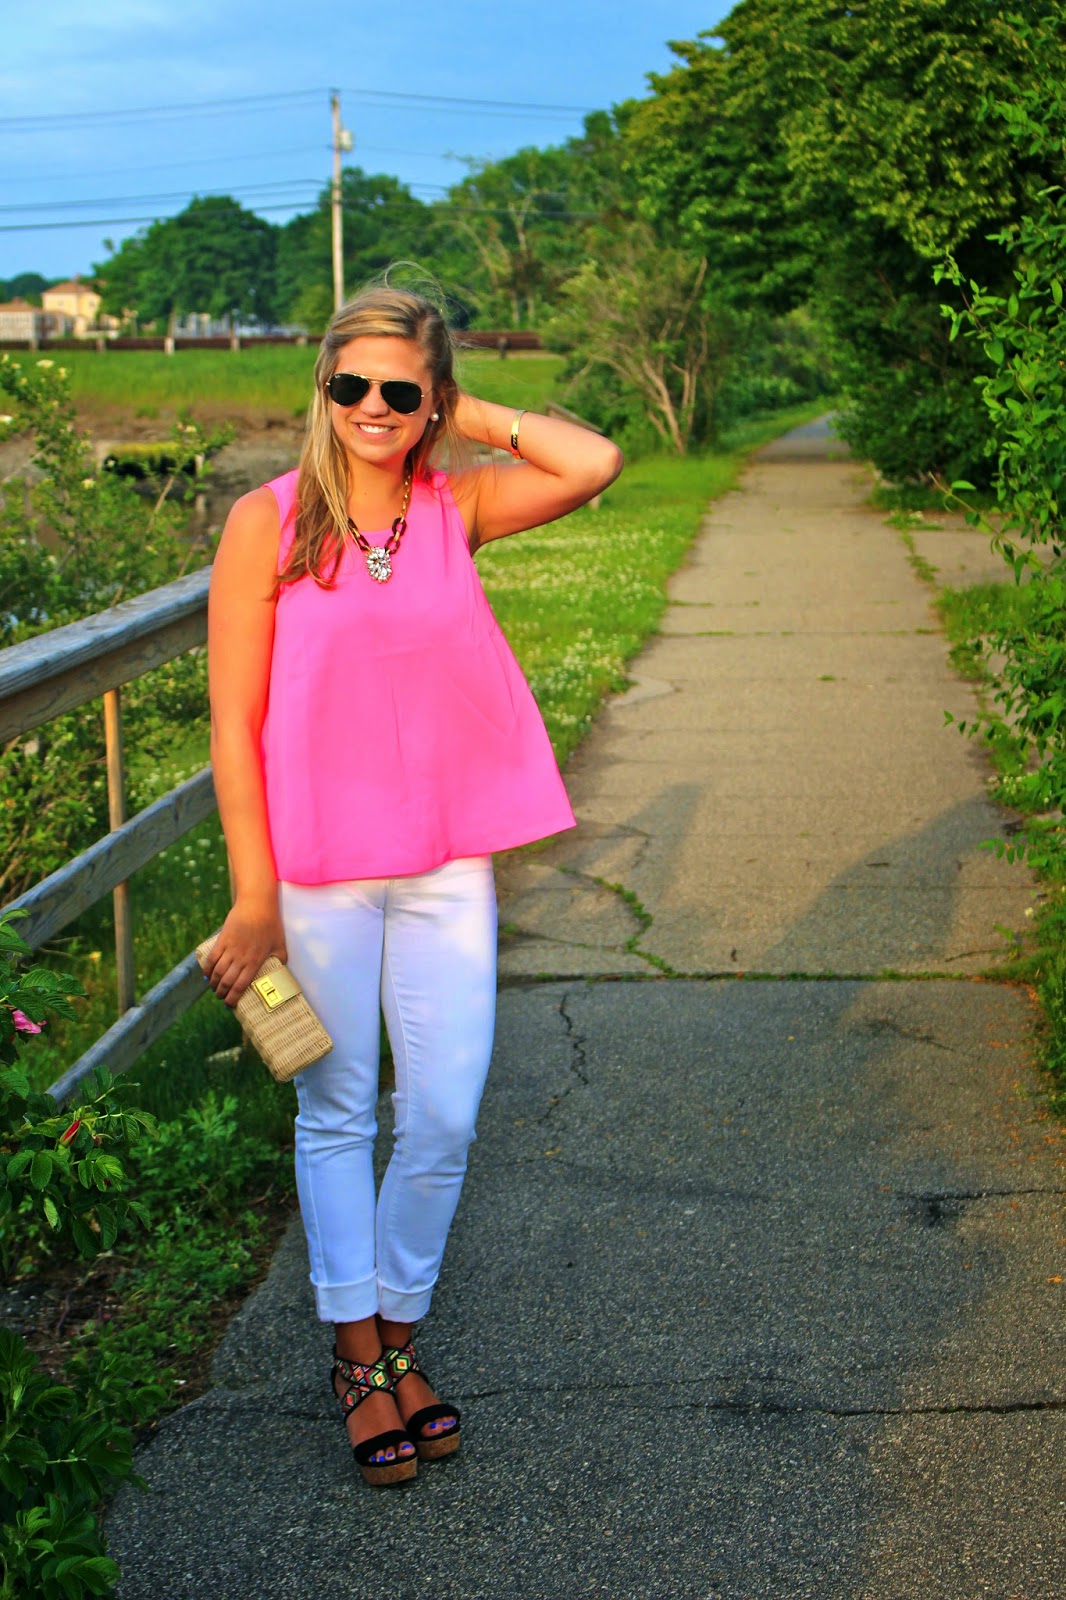 Style Cubby - Fashion and Lifestyle Blog Based in New England: Outfit ...